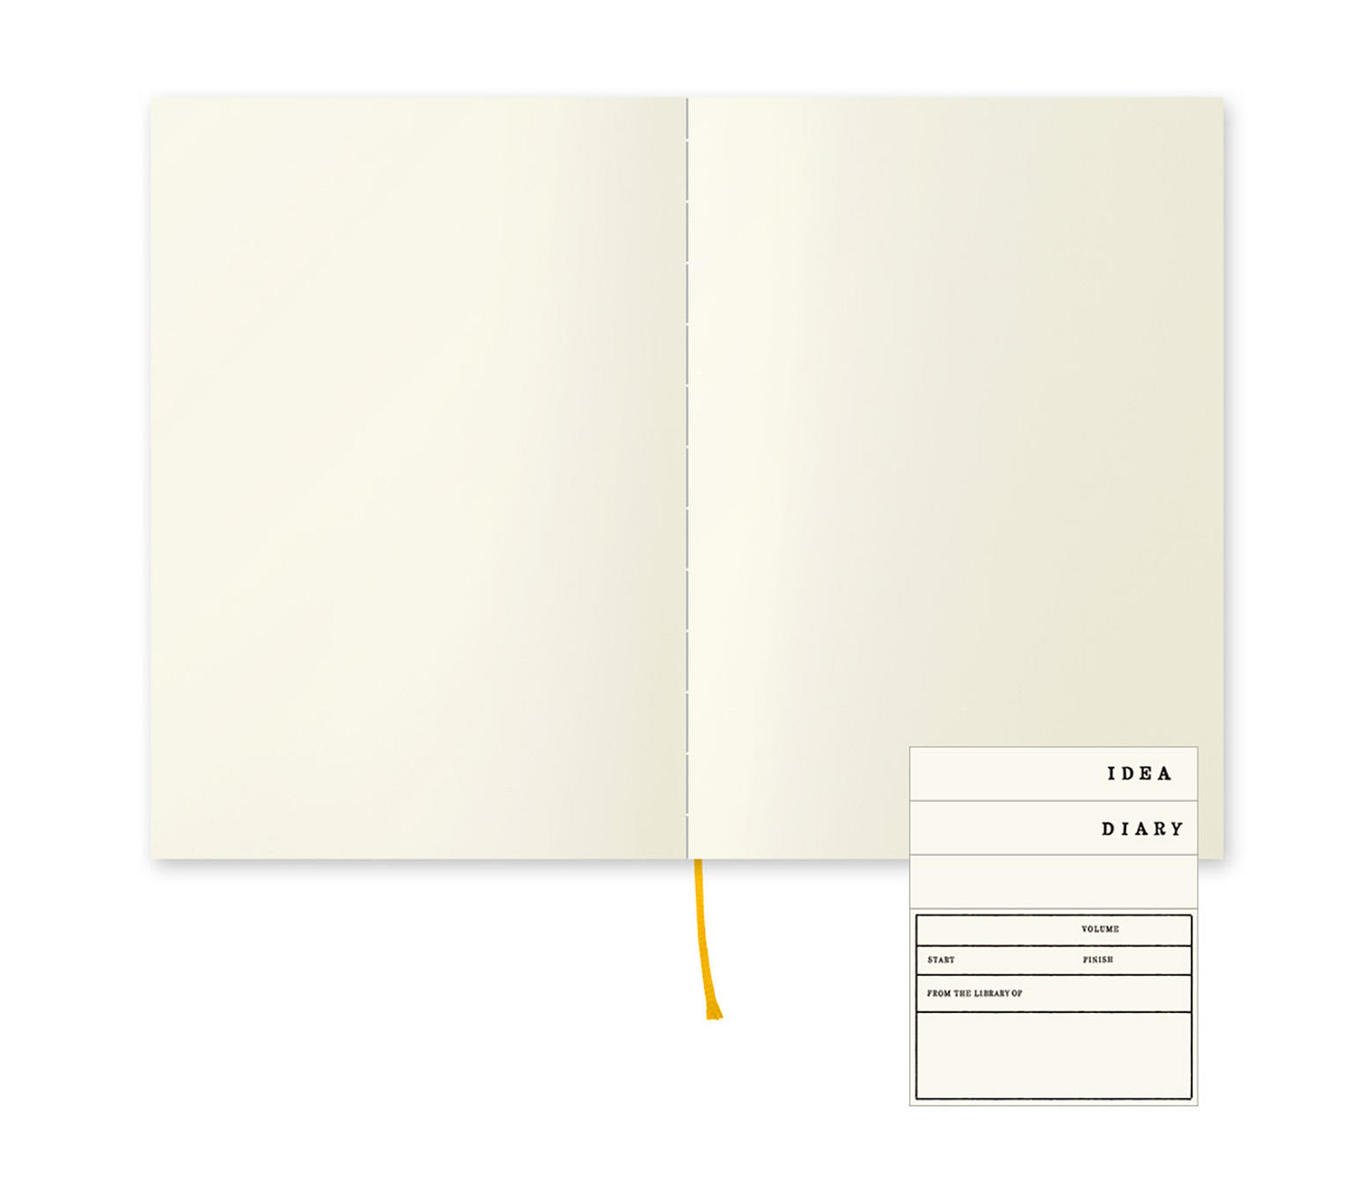 Midori MD notebook A5 Plain. Shows stickers. Made with MD paper. Notebook for journaling, note taking and sketching.